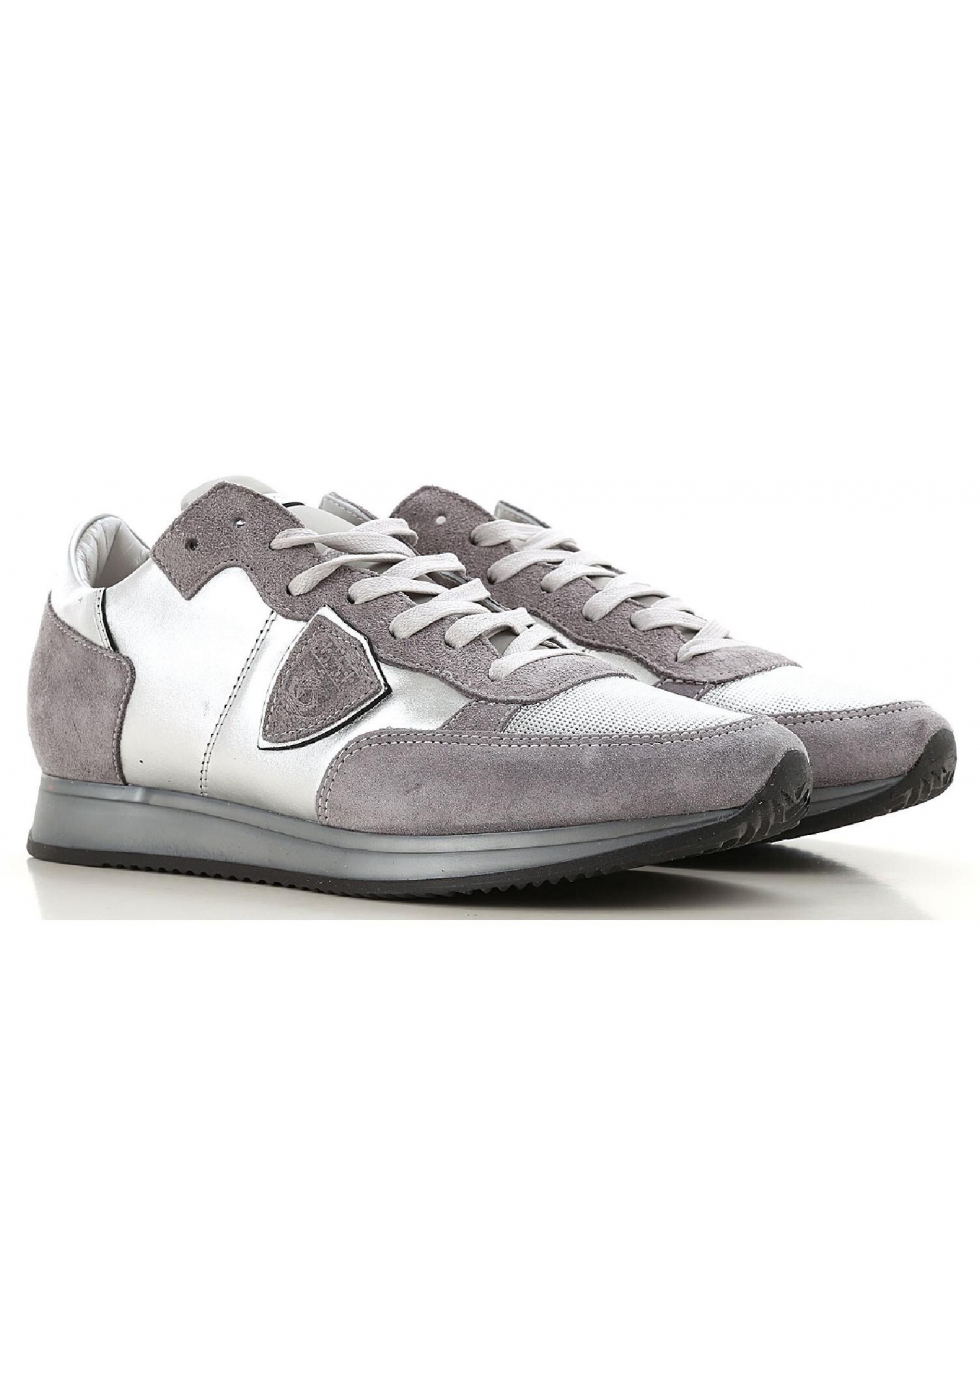 Philippe Model women's sneakers in silver Leather and fabric - Italian ...